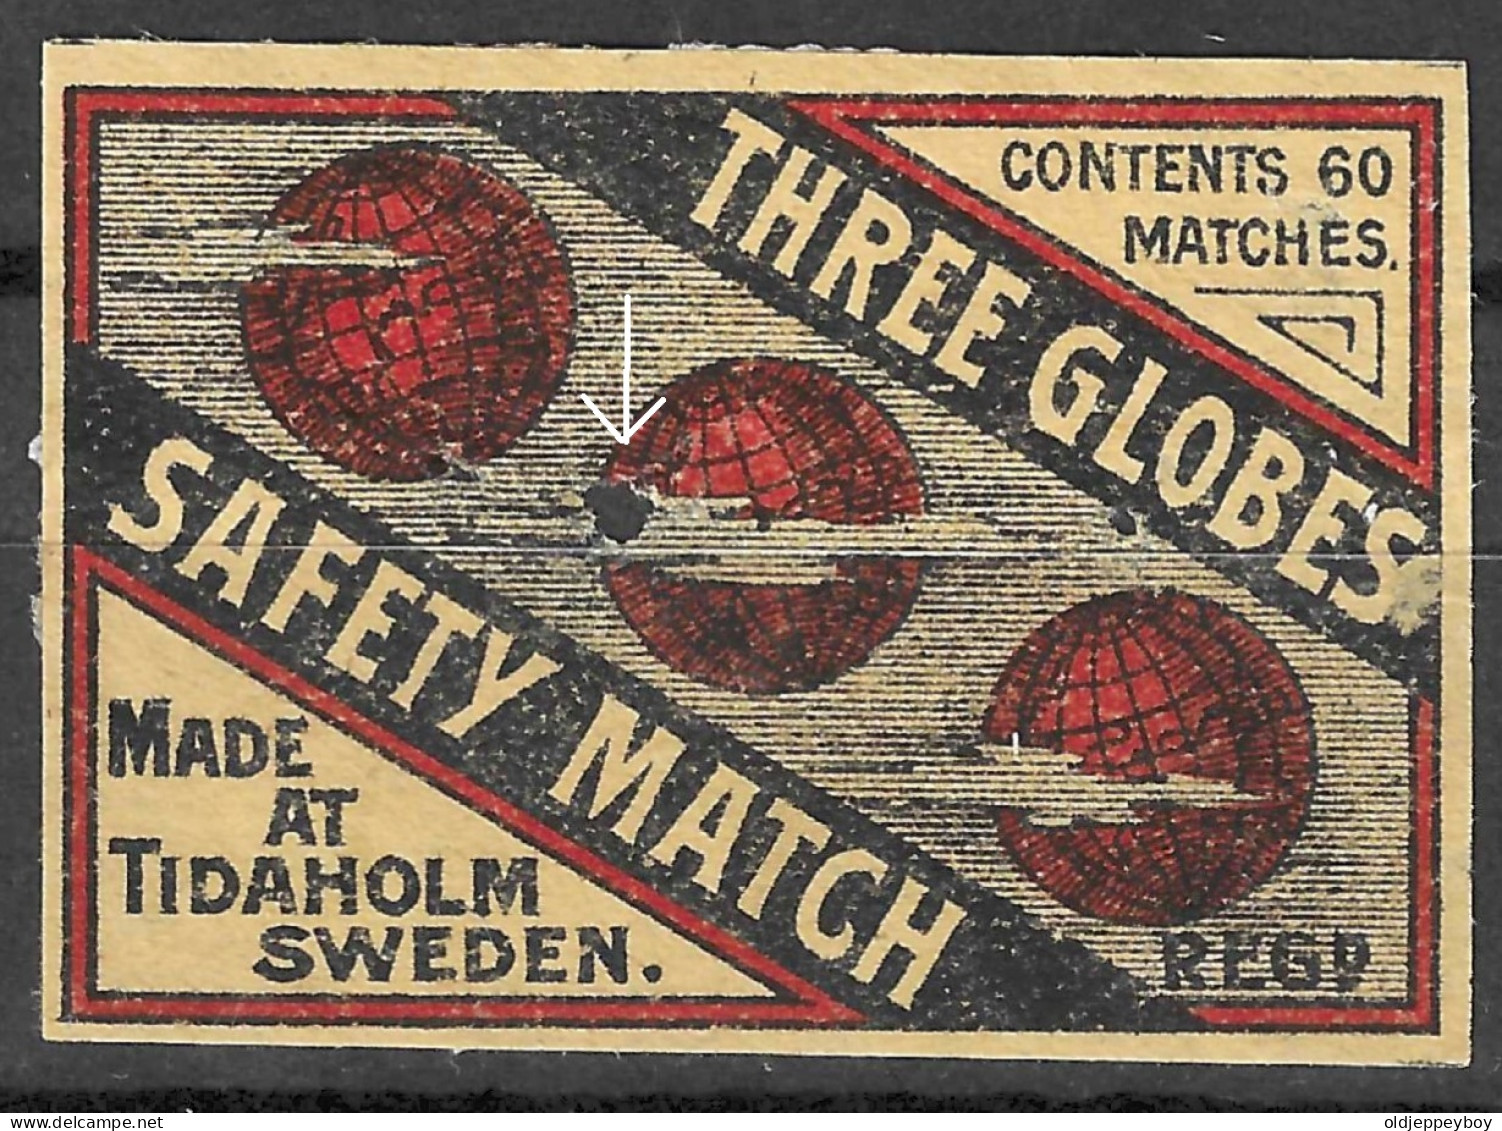  MADE  IN TIDAHOLM SWEDEN VINTAGE Phillumeny MATCHBOX LABEL THREE GLOBES  5  X 3.5 CM  SMALL HOLE AS INDICATED IN SCAN - Boites D'allumettes - Etiquettes